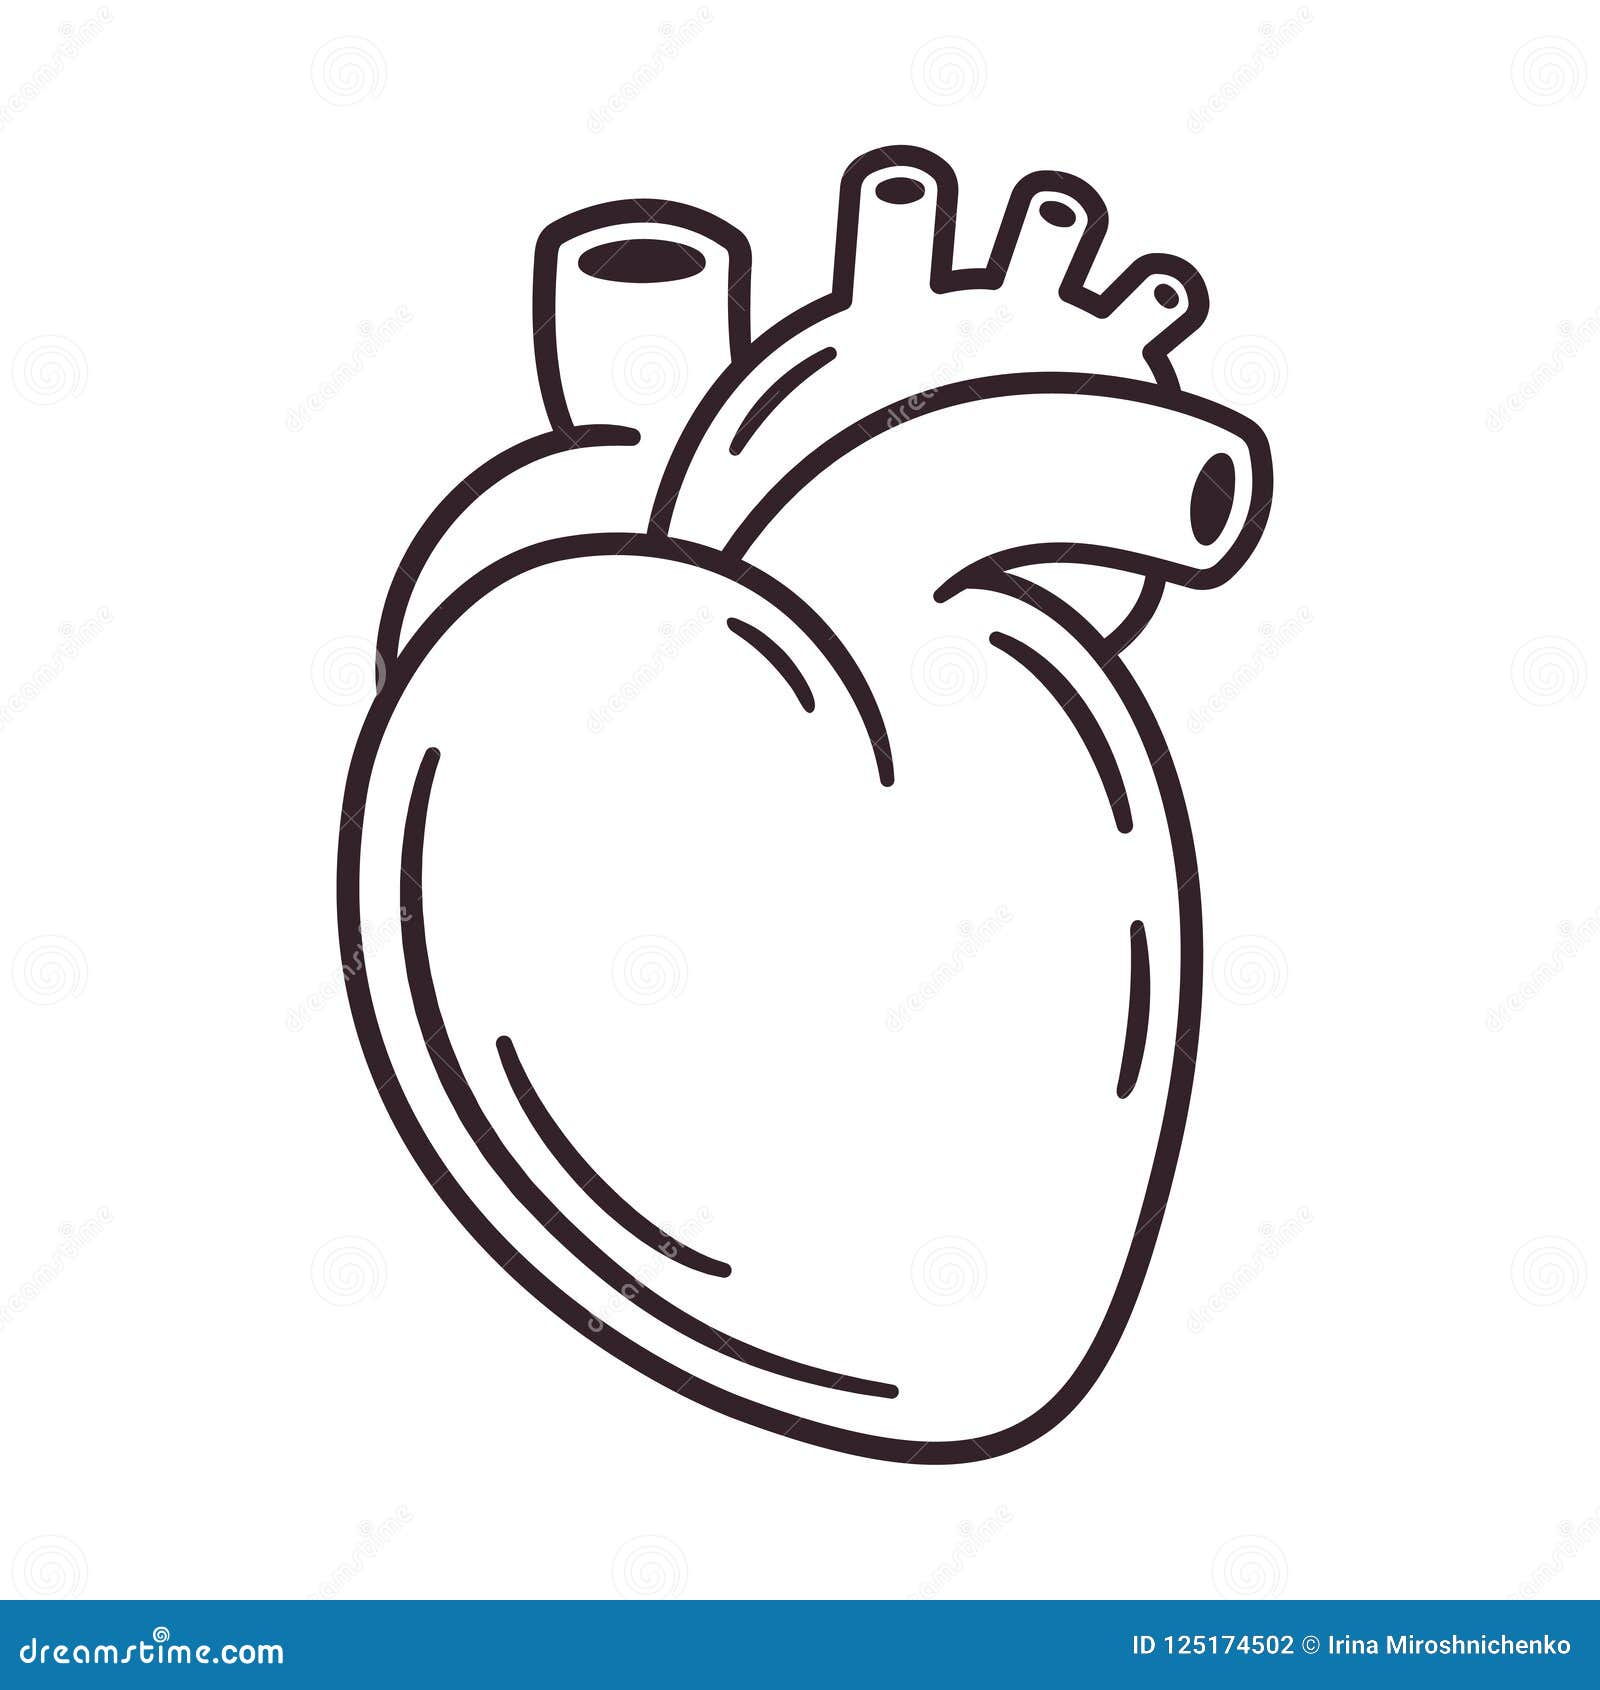 Share more than 85 realistic heart sketch latest - in.eteachers